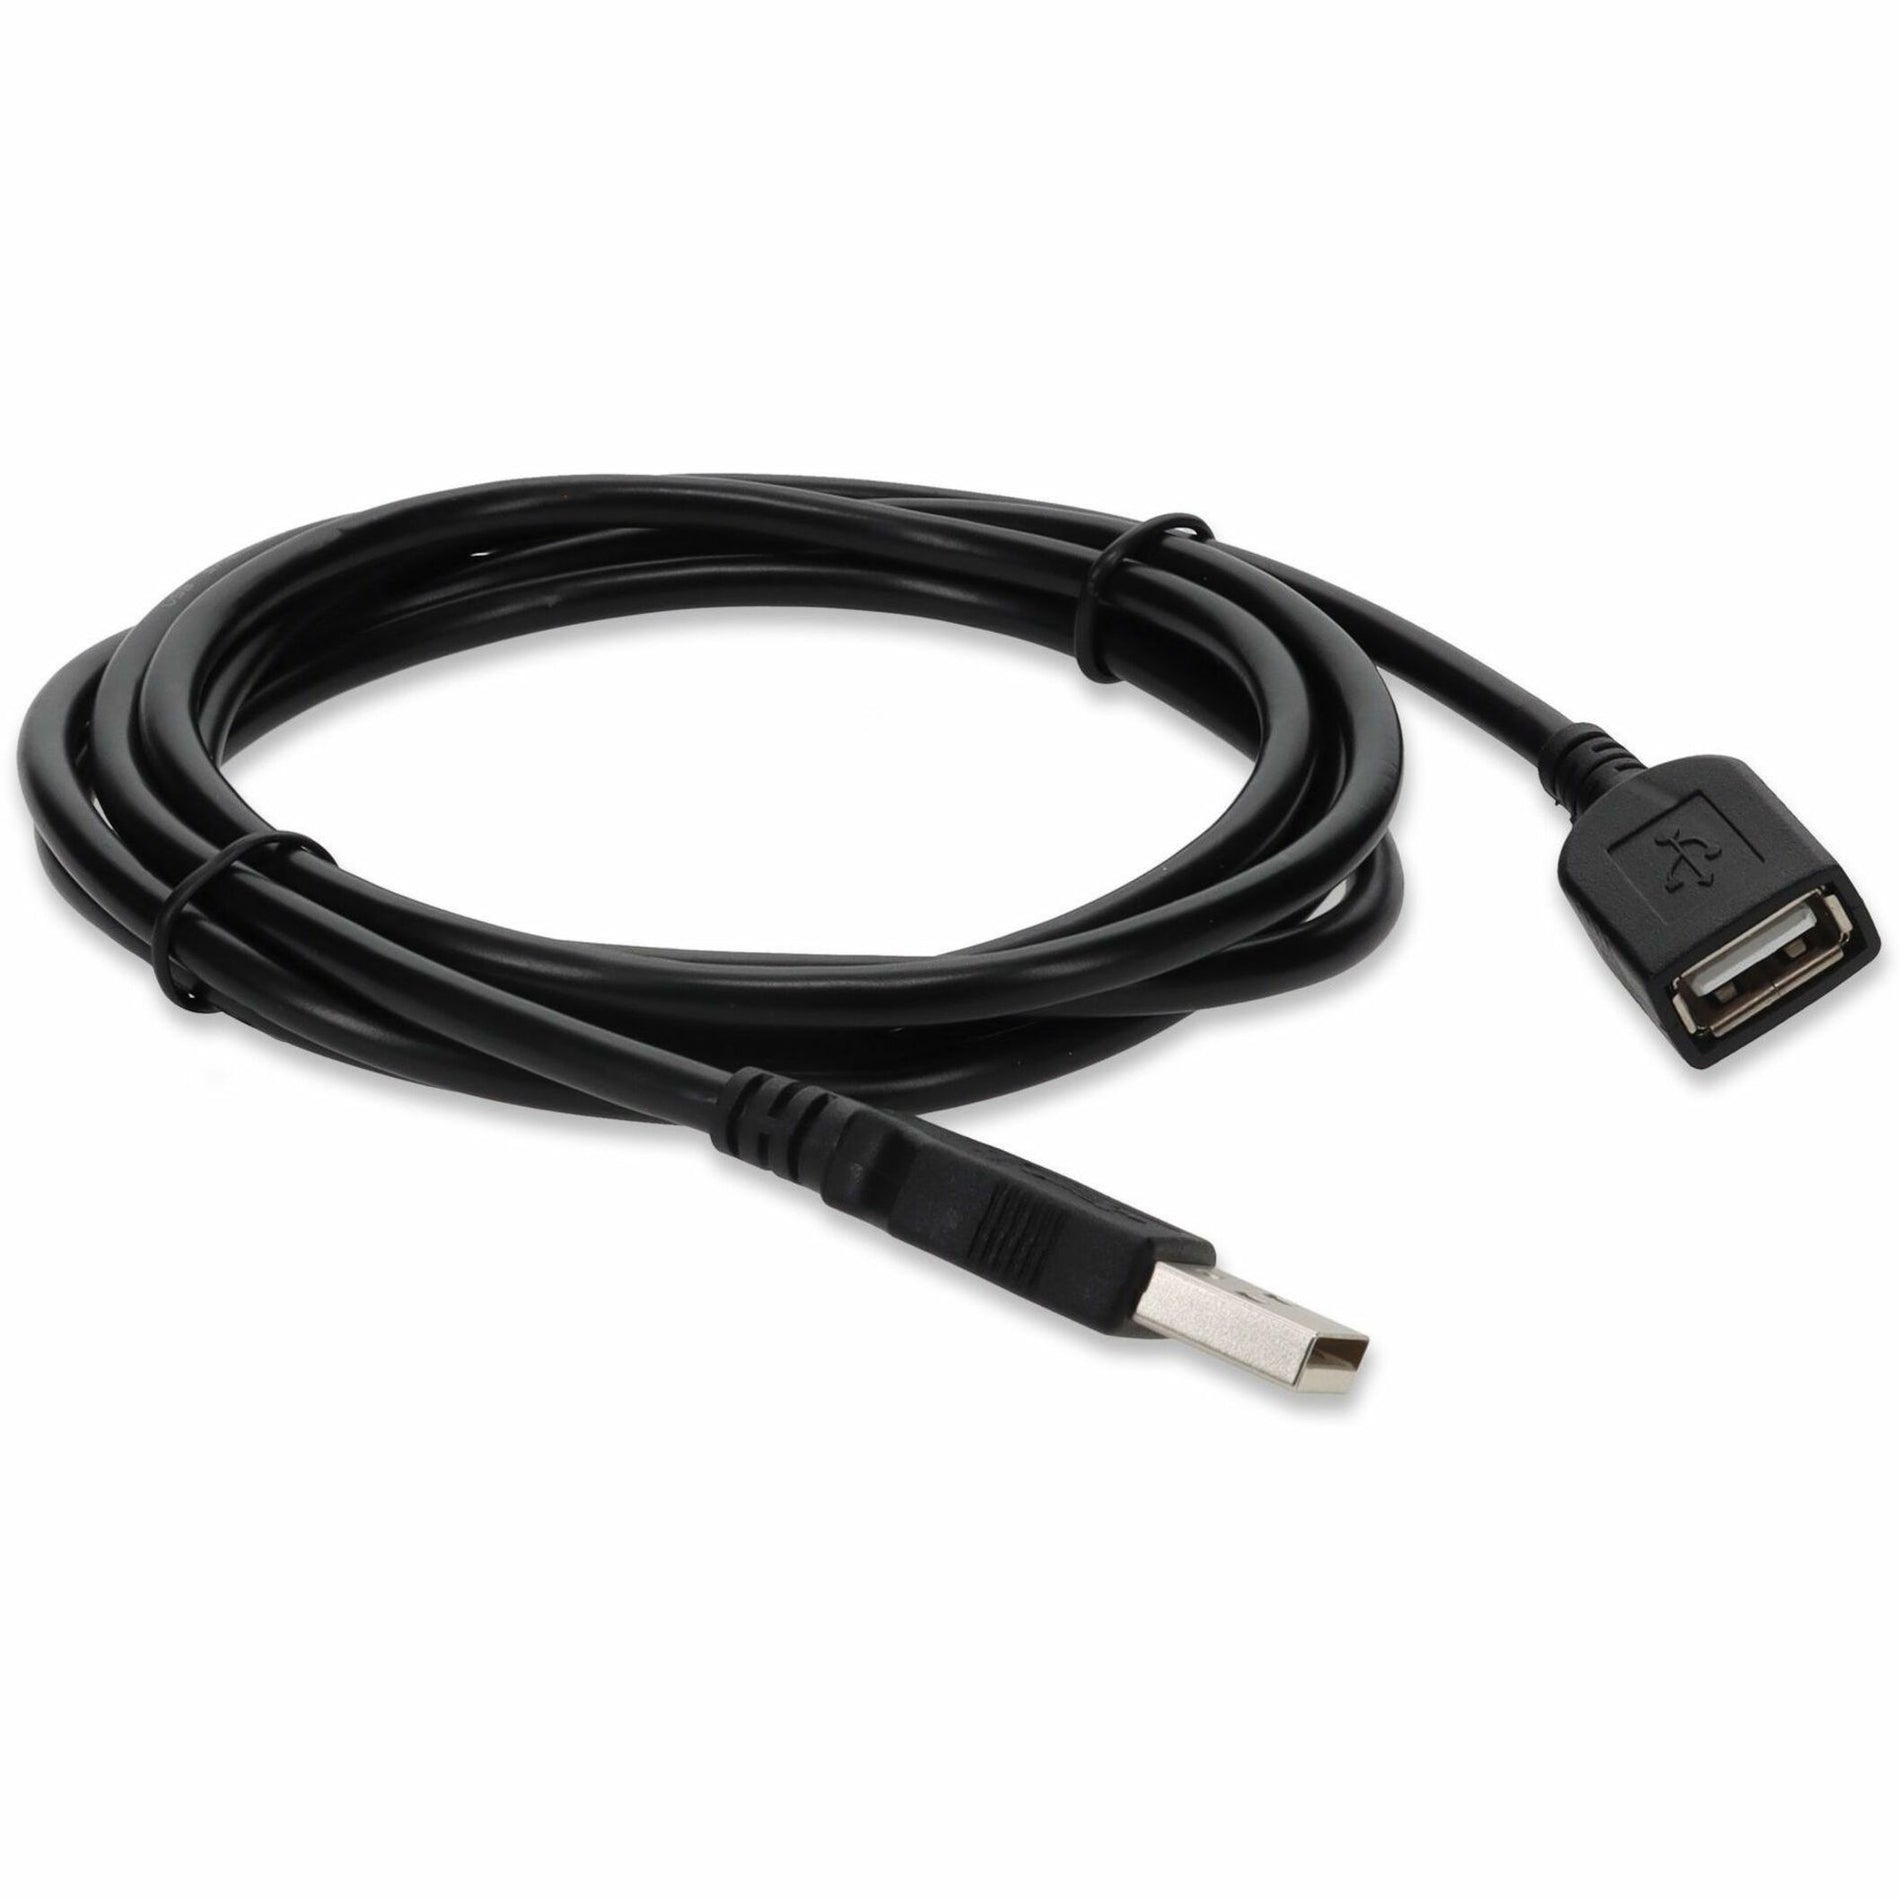 AddOn USBEXTAA6 6ft USB 2.0 A to A Extension Cable - Male to Female, Black